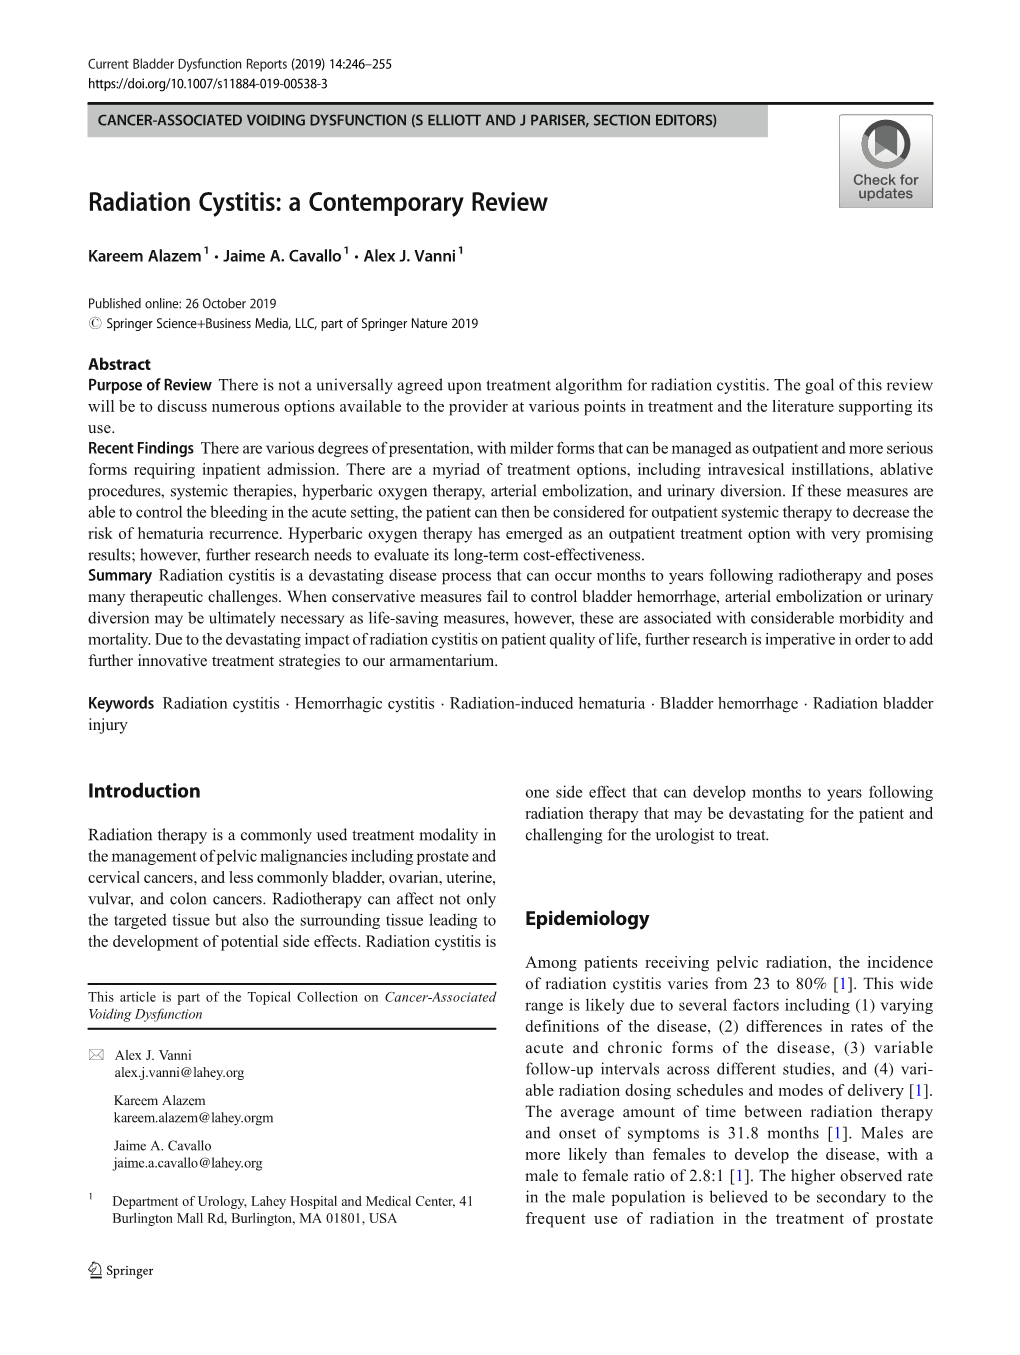 Radiation Cystitis: a Contemporary Review